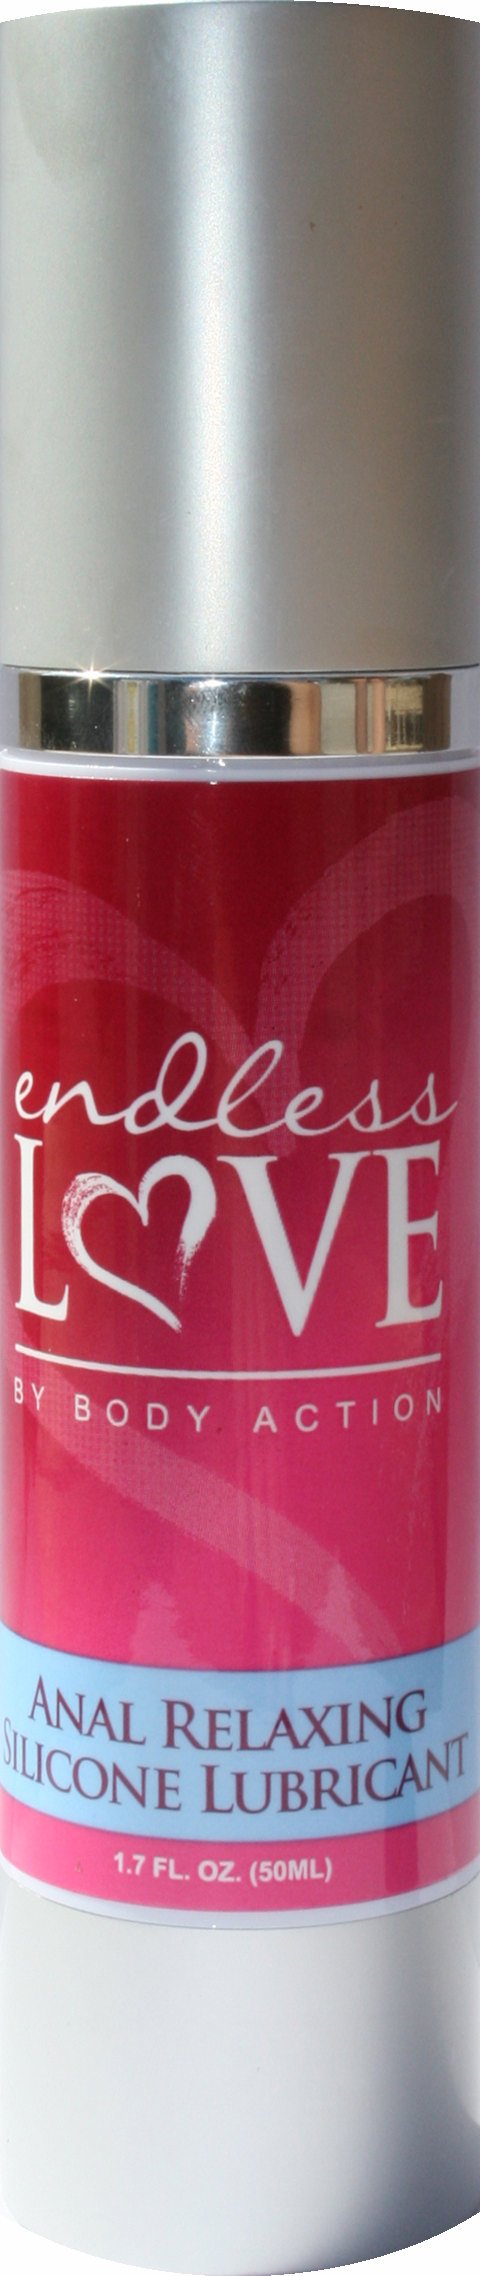 Endless Love Lubricant 1.7 Oz Body Action Products